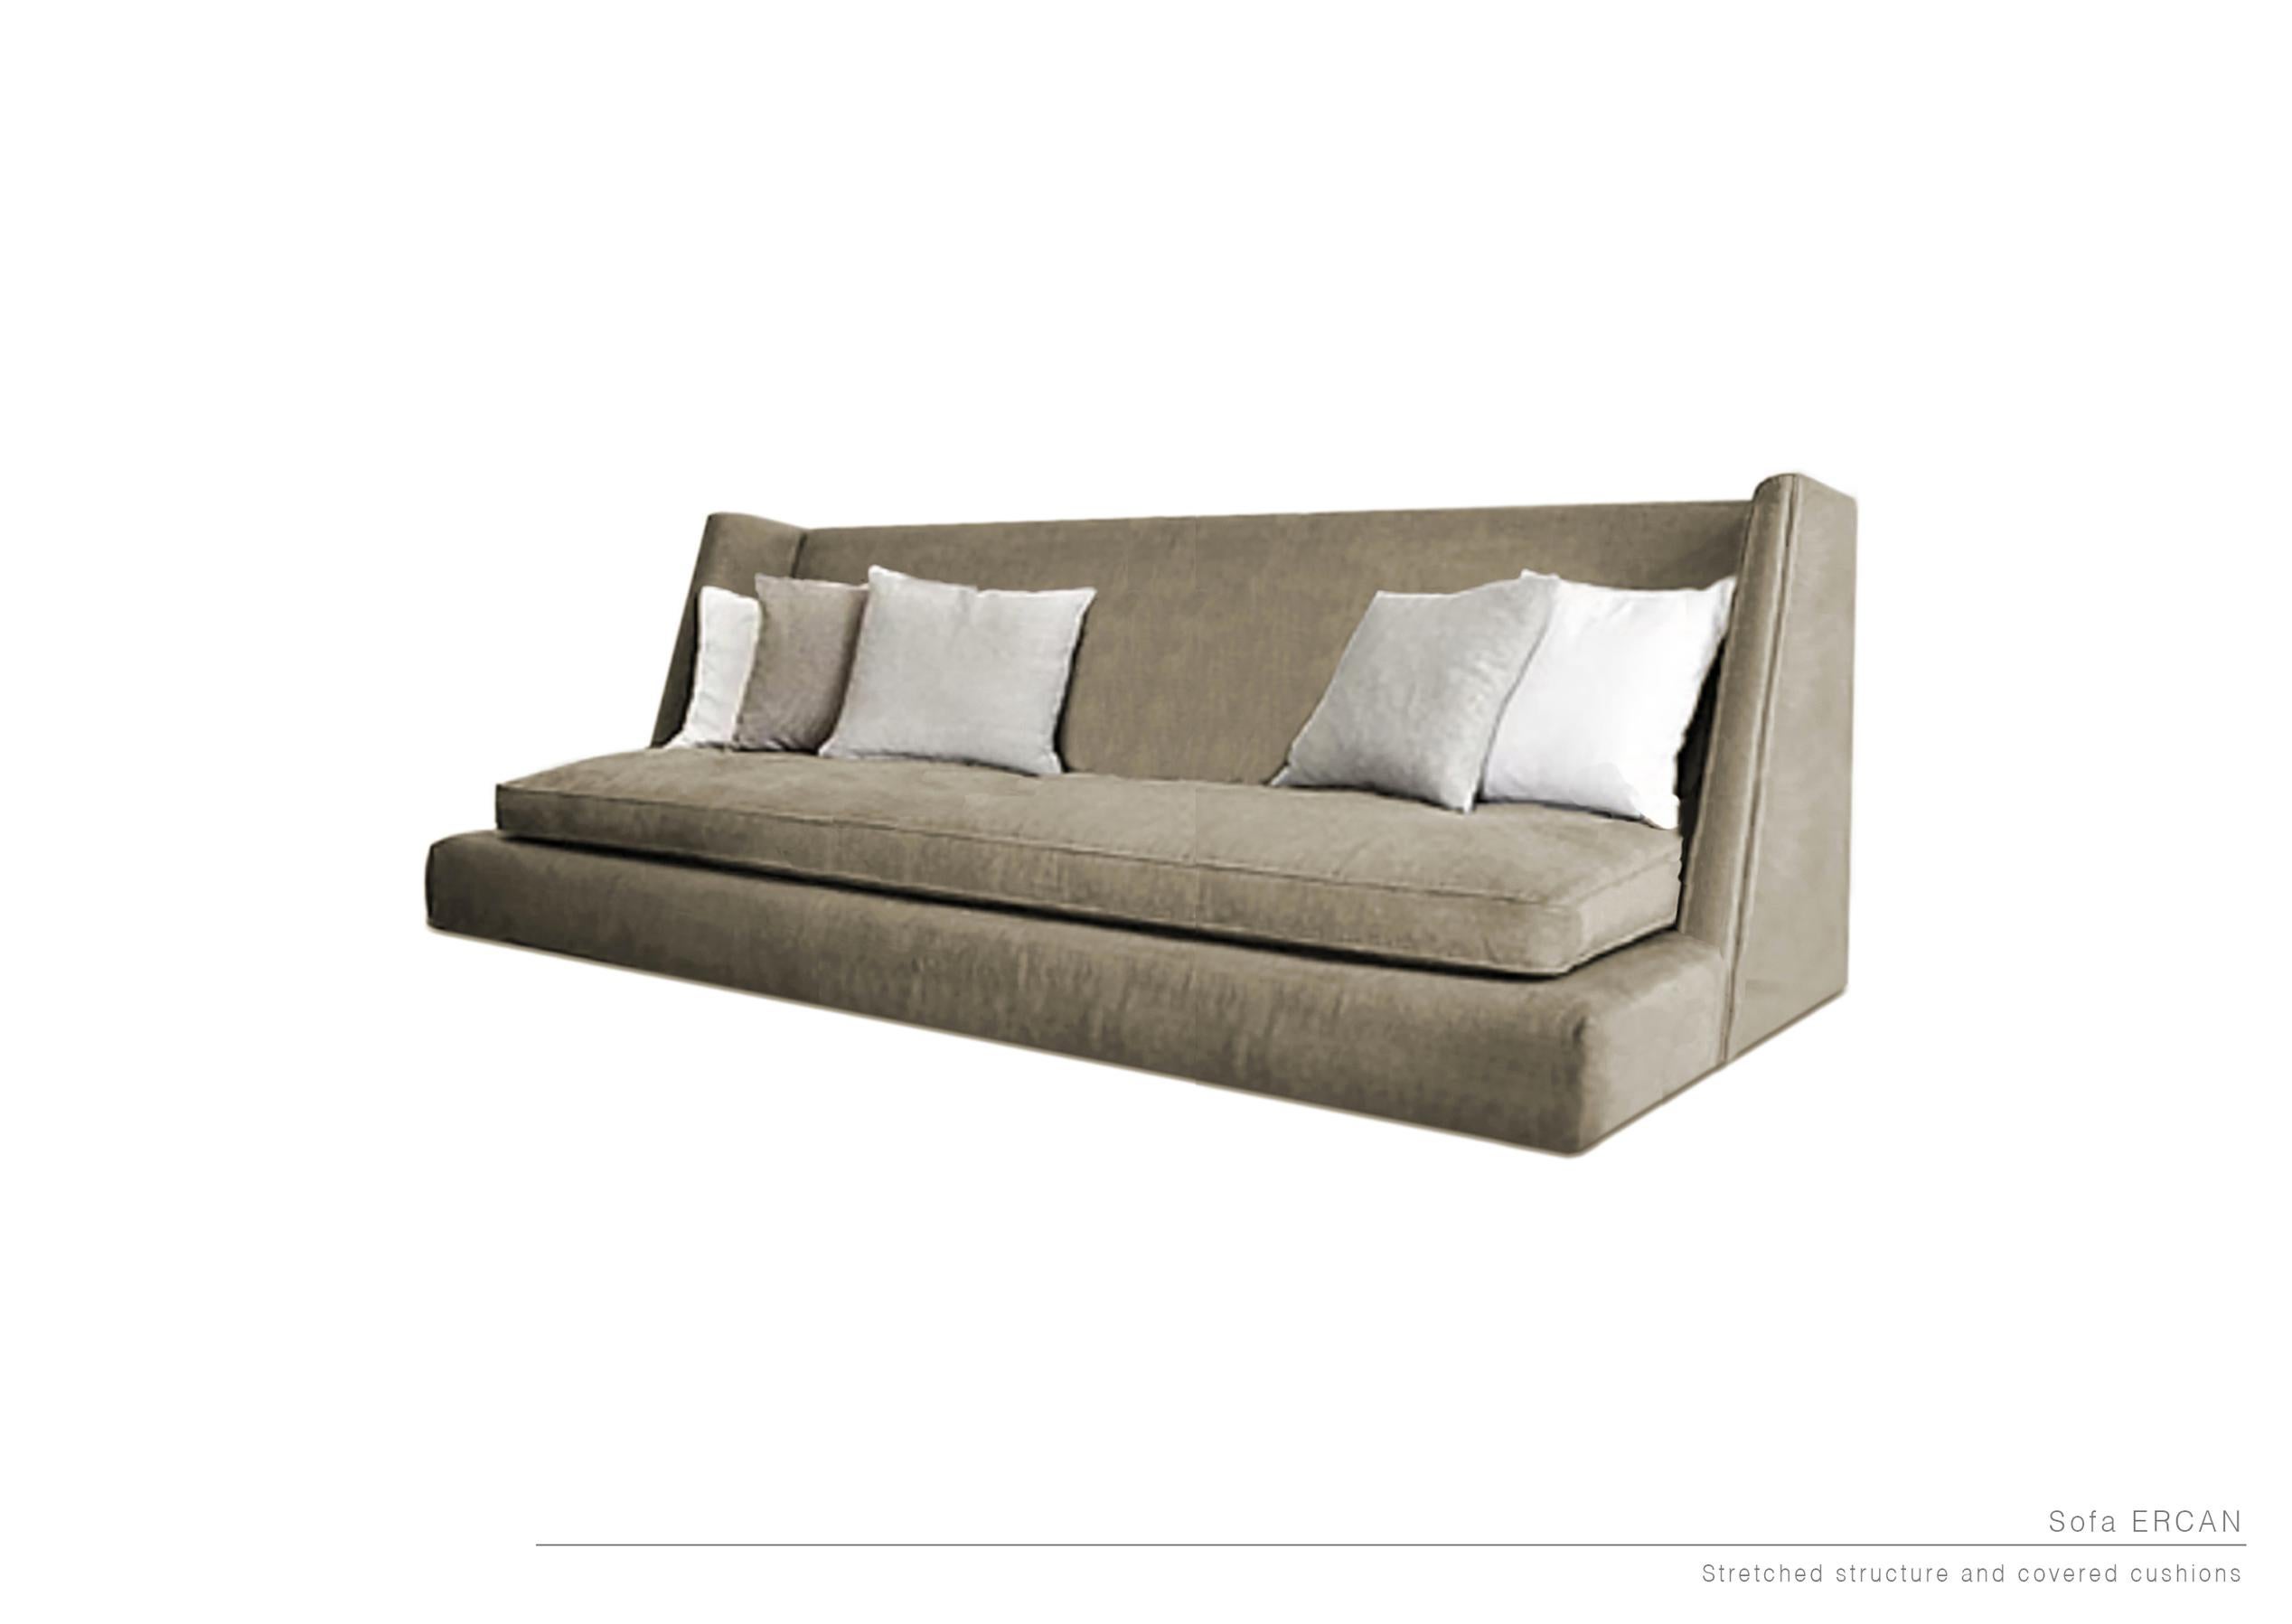 Ercan sofa with cushions by LK Edition
Dimensions: 250 x 105.5 x H 94.5 cm
Materials: Upholstered in linen with cushions. 

It is with the sense of detail and requirement, this research of the exception by the selection of noble materials and